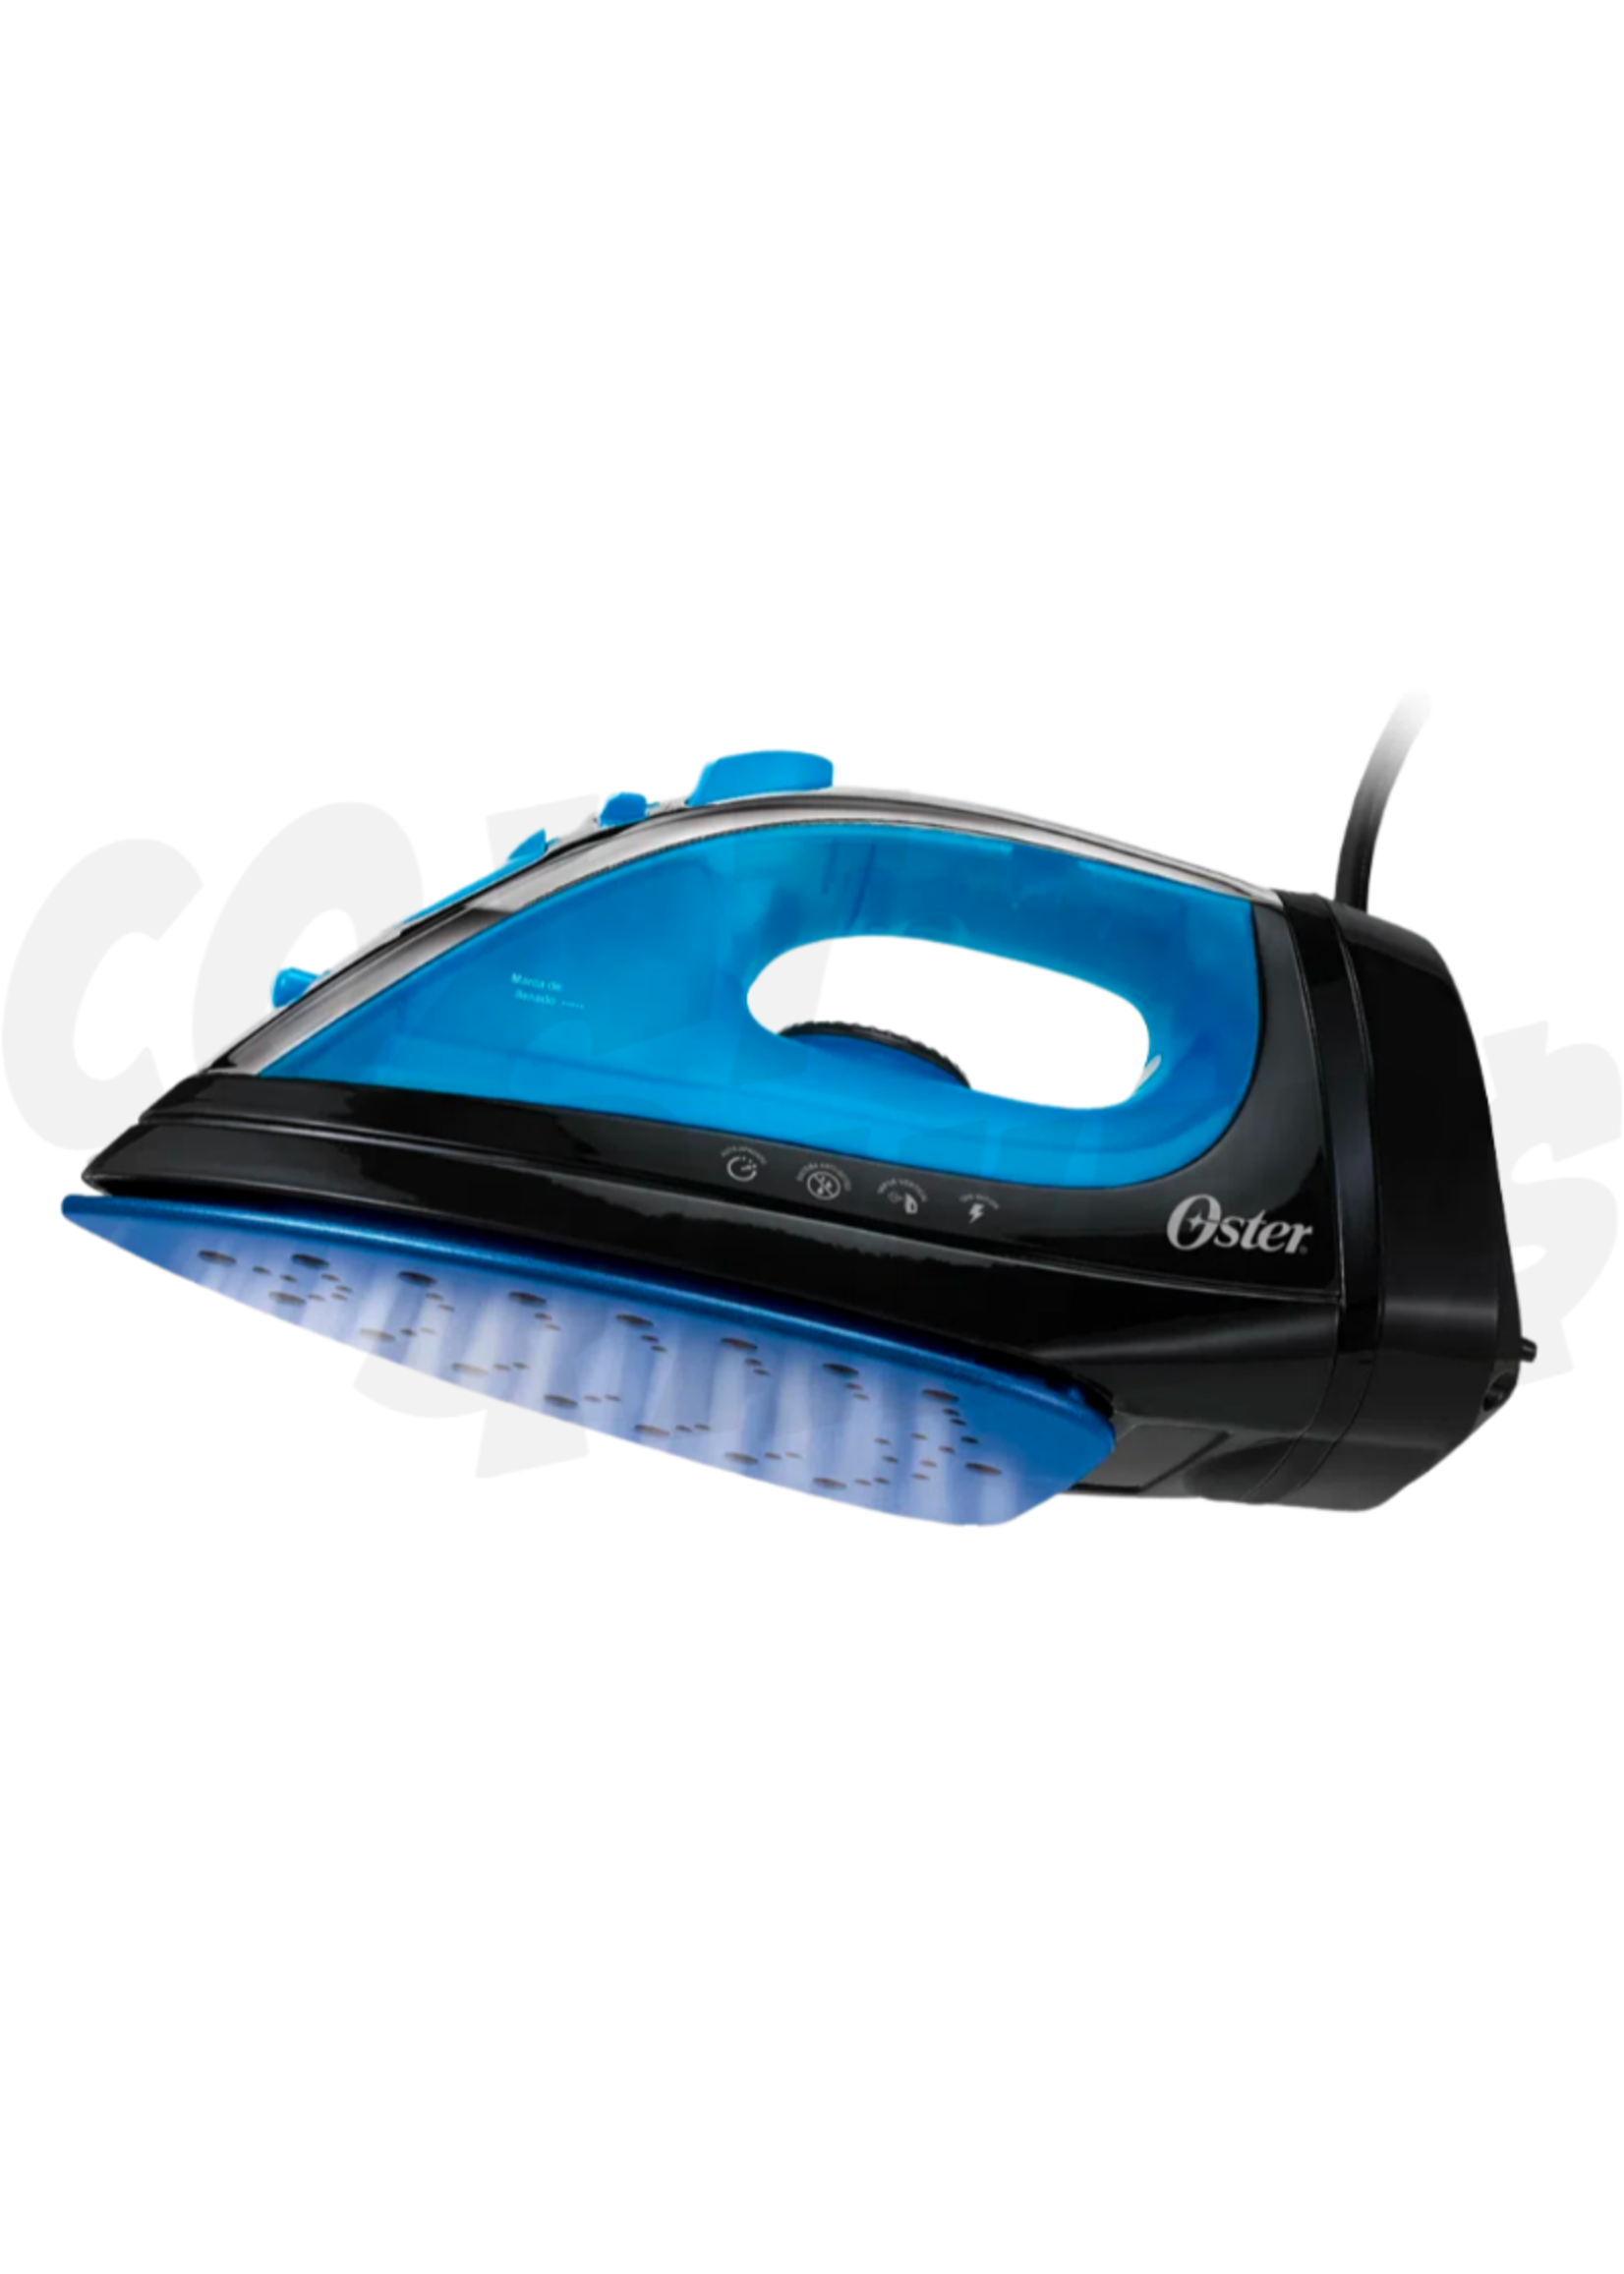 Oster Oster Steam Iron w/Retractable Cord (Blue)